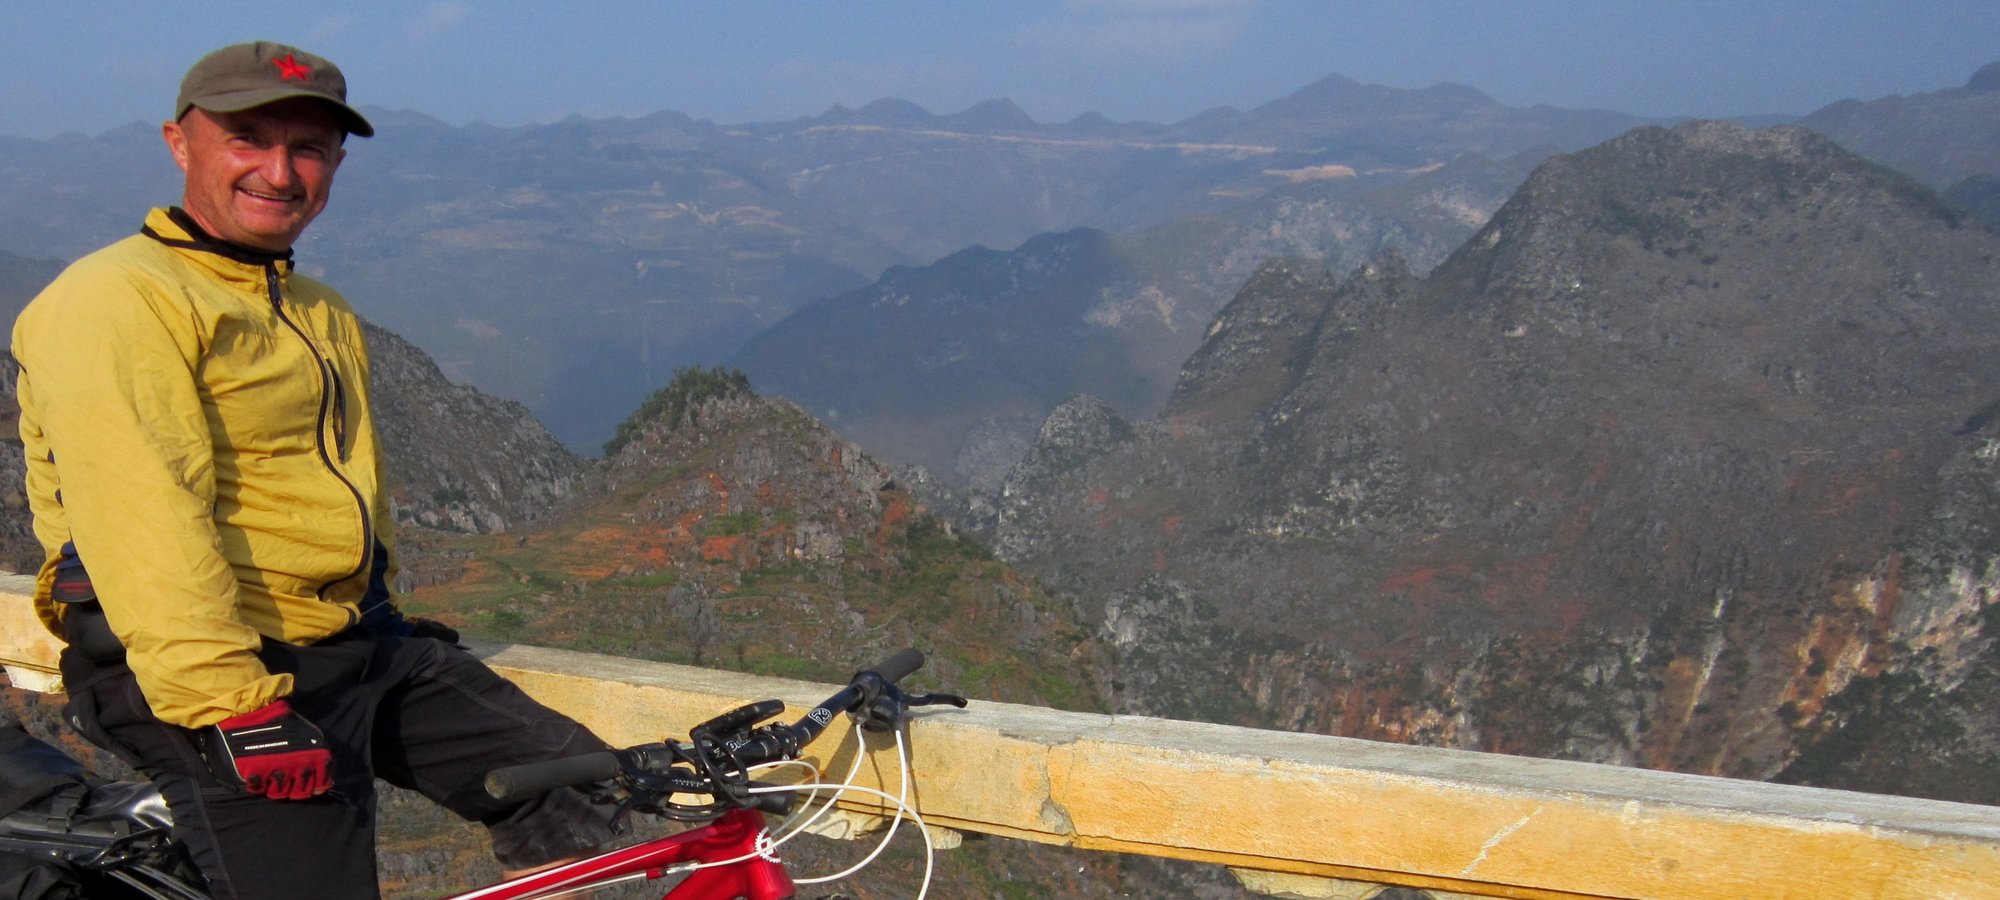 North East Vietnam Cycling Holiday